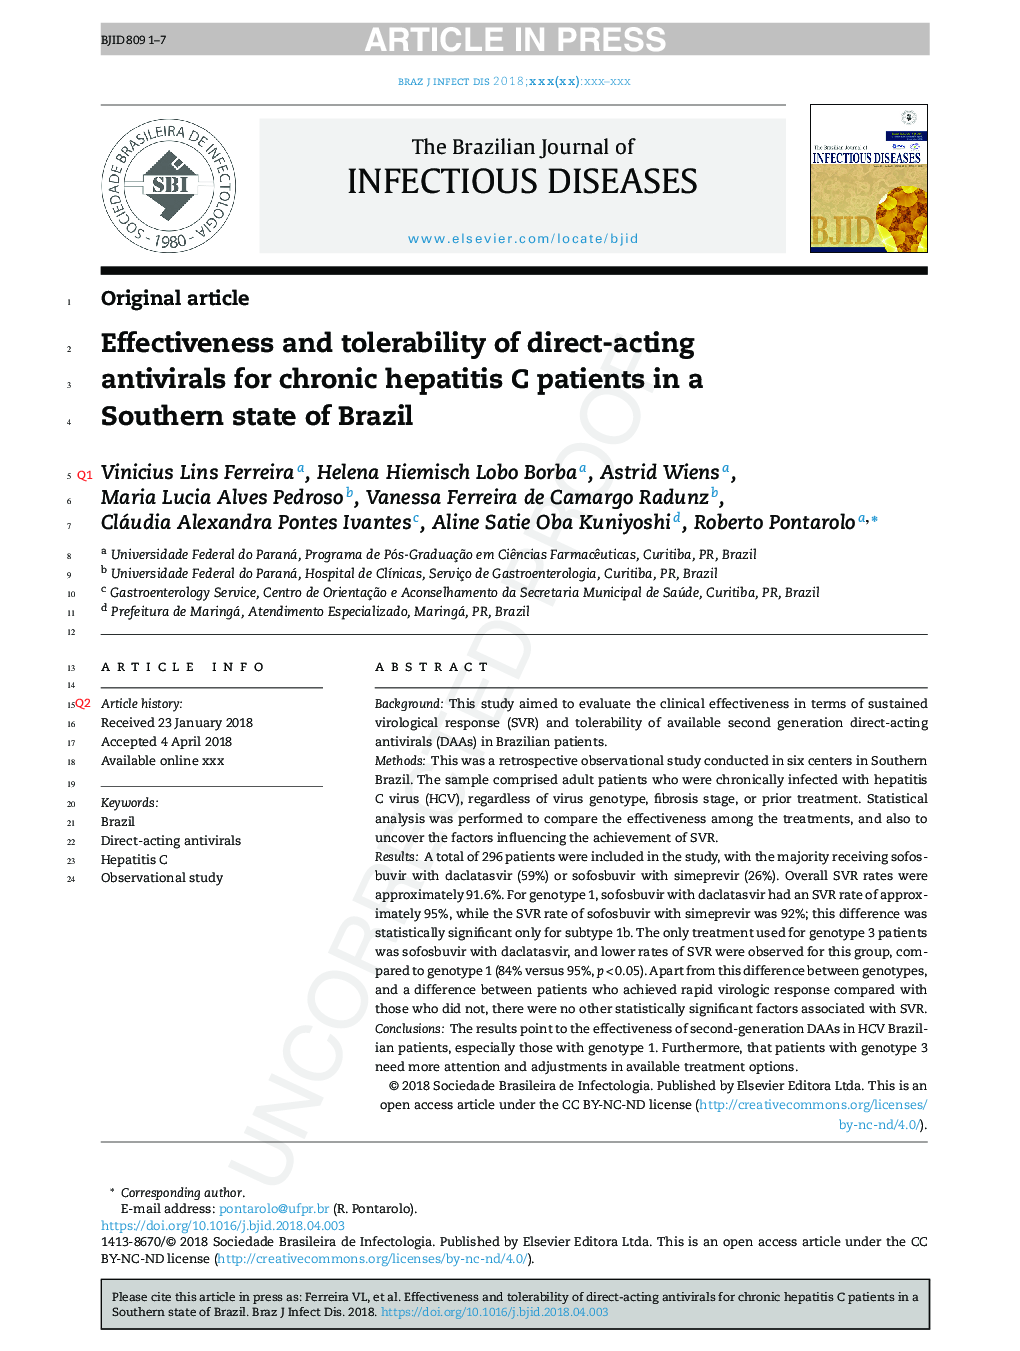 Effectiveness and tolerability of direct-acting antivirals for chronic hepatitis C patients in a Southern state of Brazil